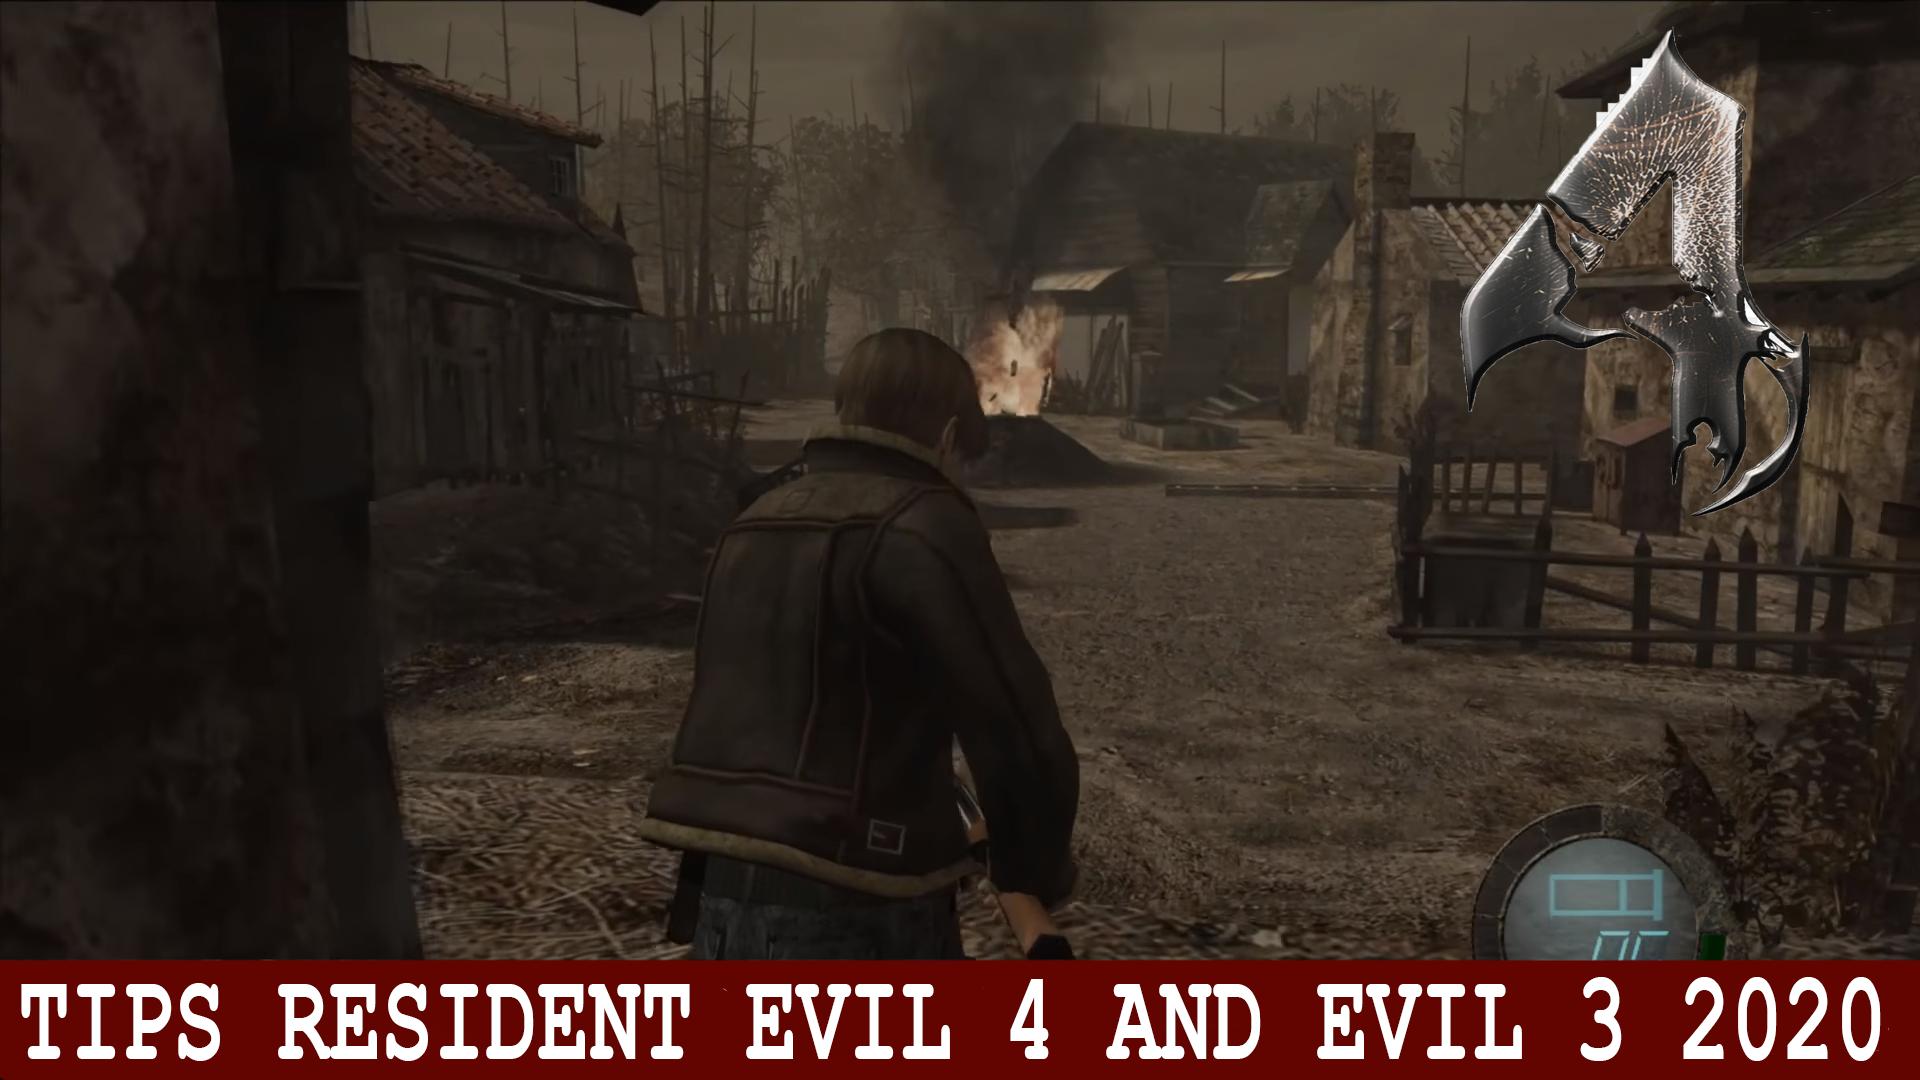 Resident Evil 4 remake has a fun little ARG that makes you a